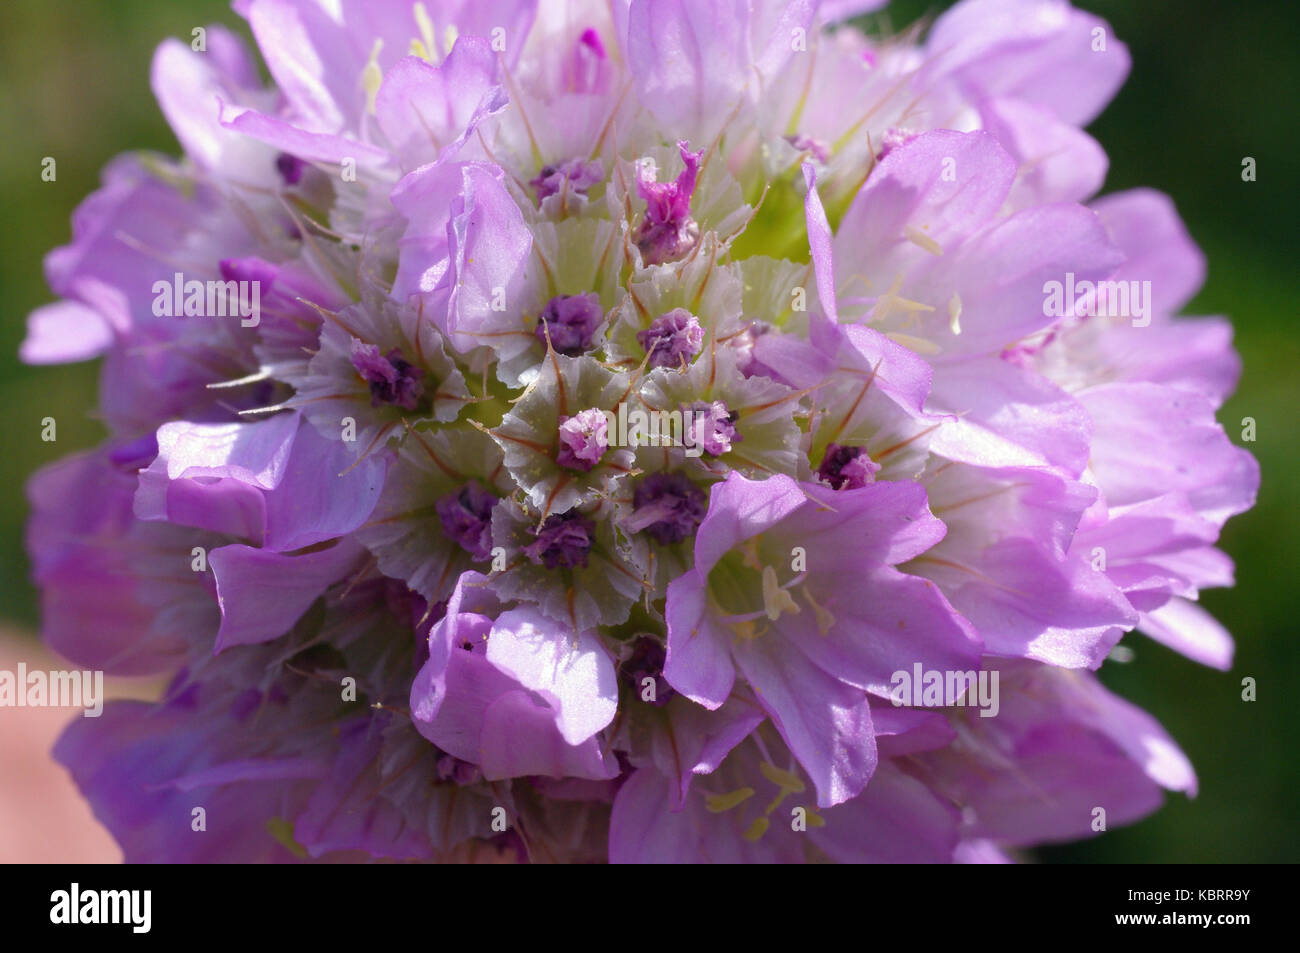 this is the wildflower Armeria canescens, from the family Plumbaginaceae Stock Photo